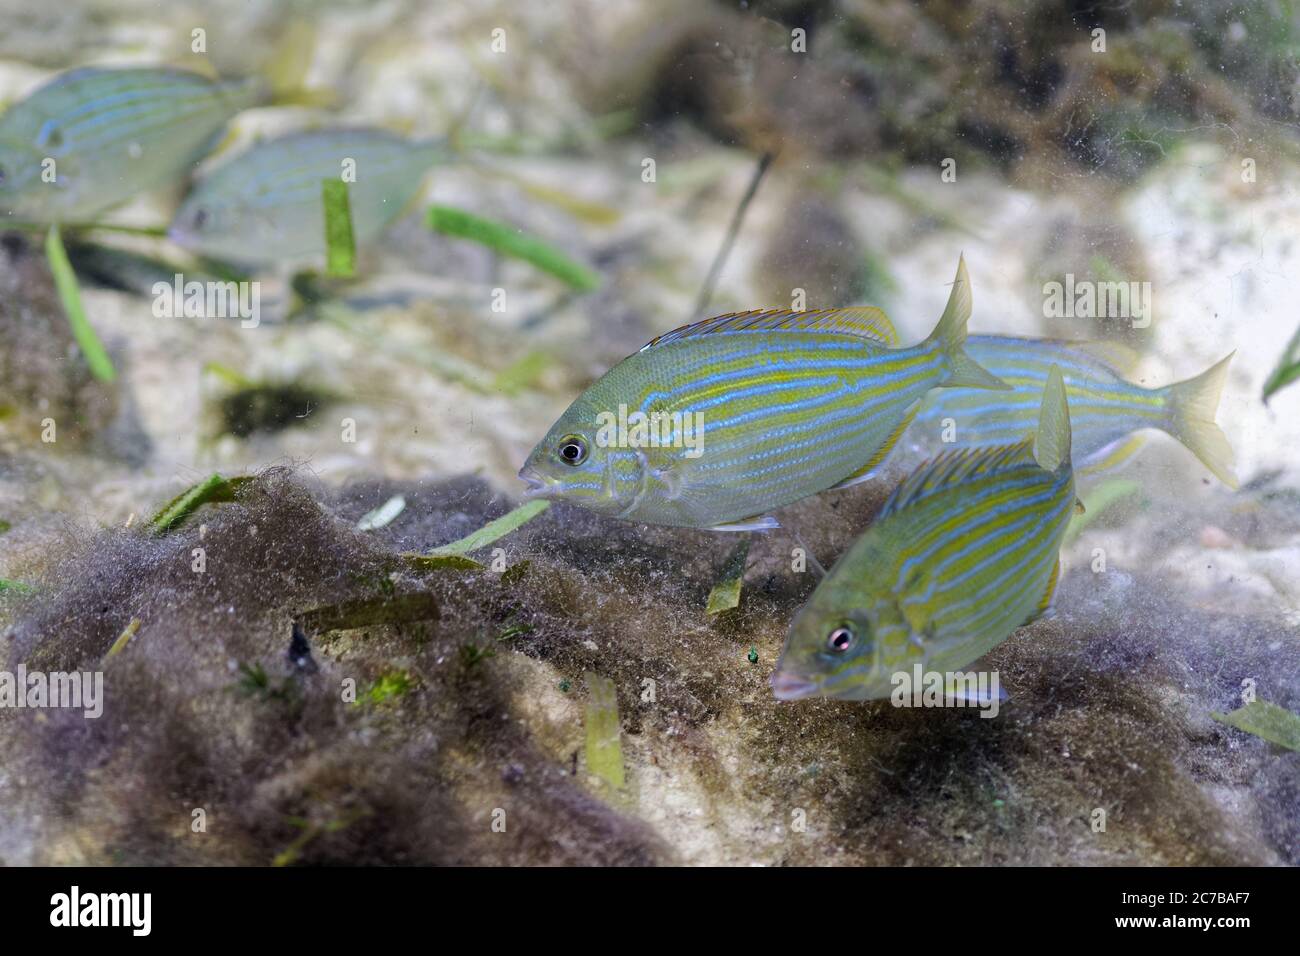 A small school of Pinfish (Lagodon rhomboides) searches for food amongst the Lyngbya (algae). Stock Photo